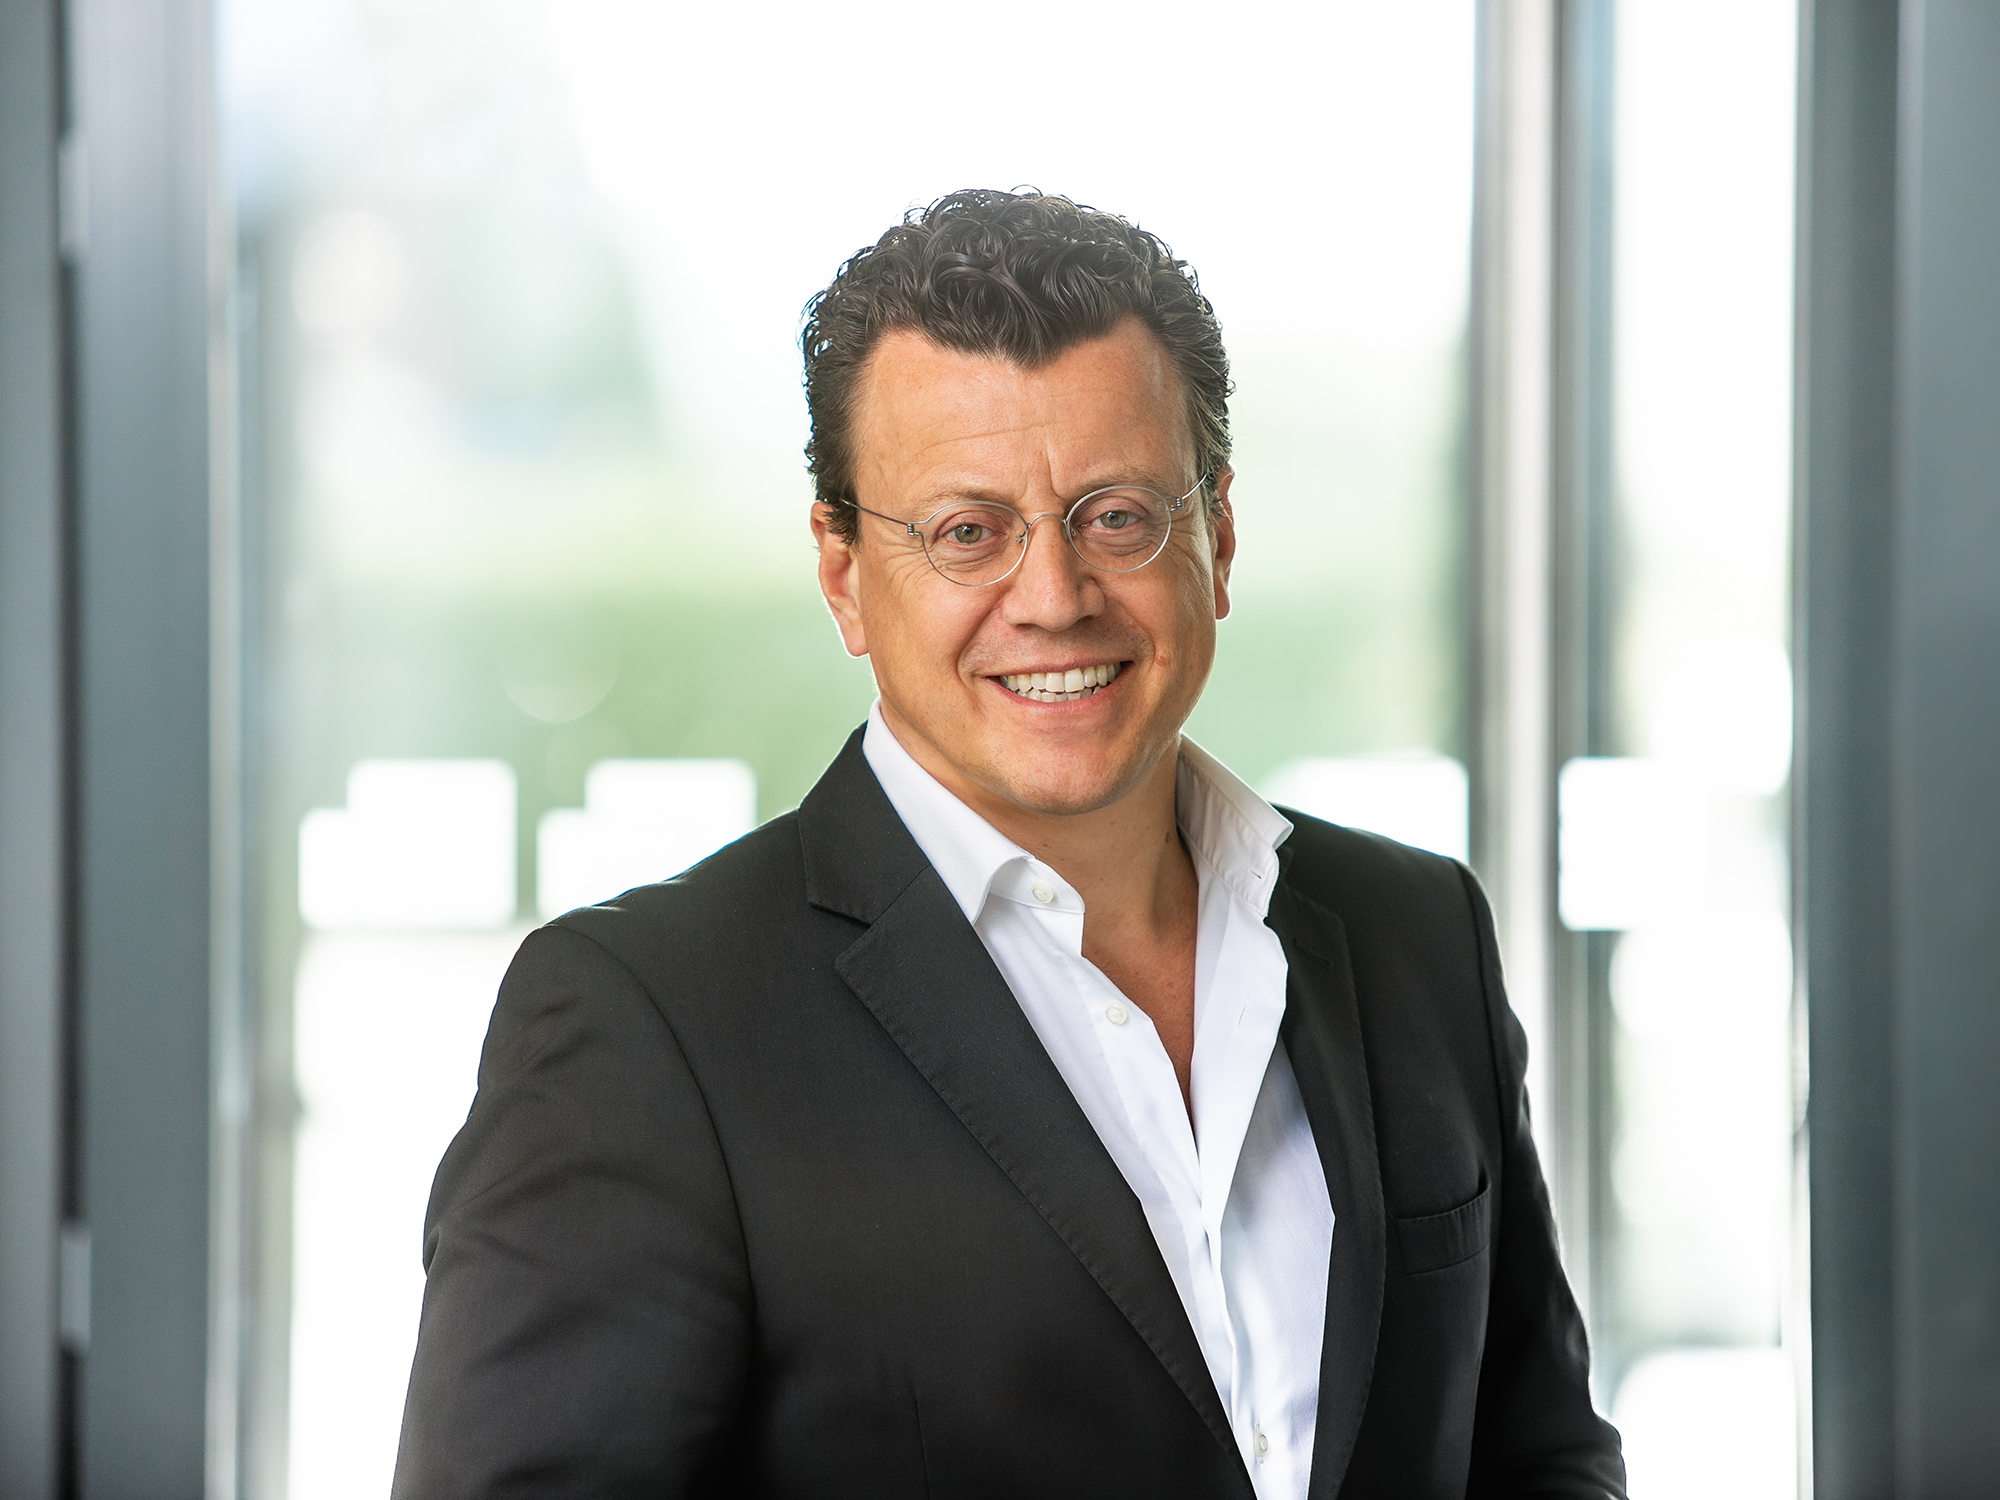 Dr. Steven Althaus, CEO of Grenzebach Group